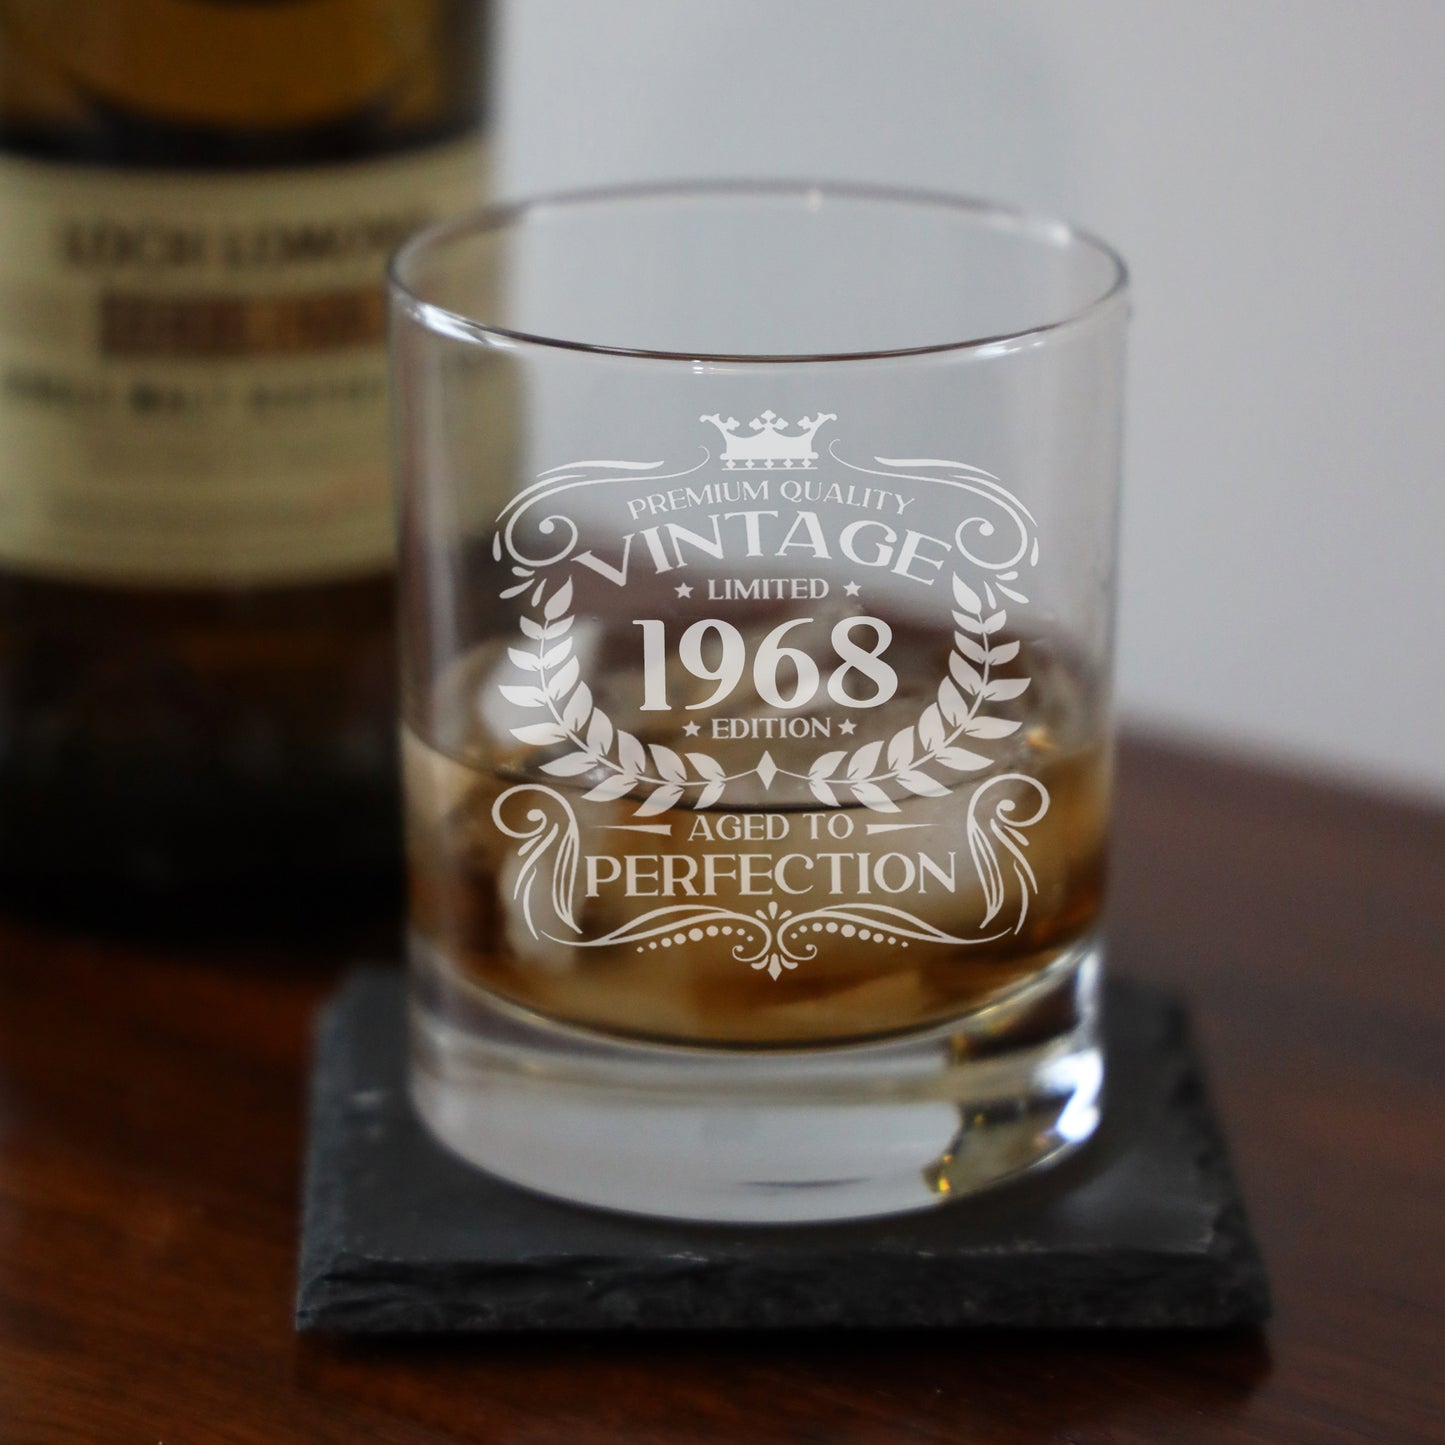 Vintage 1968 55th Birthday Engraved Whiskey Glass Gift  - Always Looking Good -   